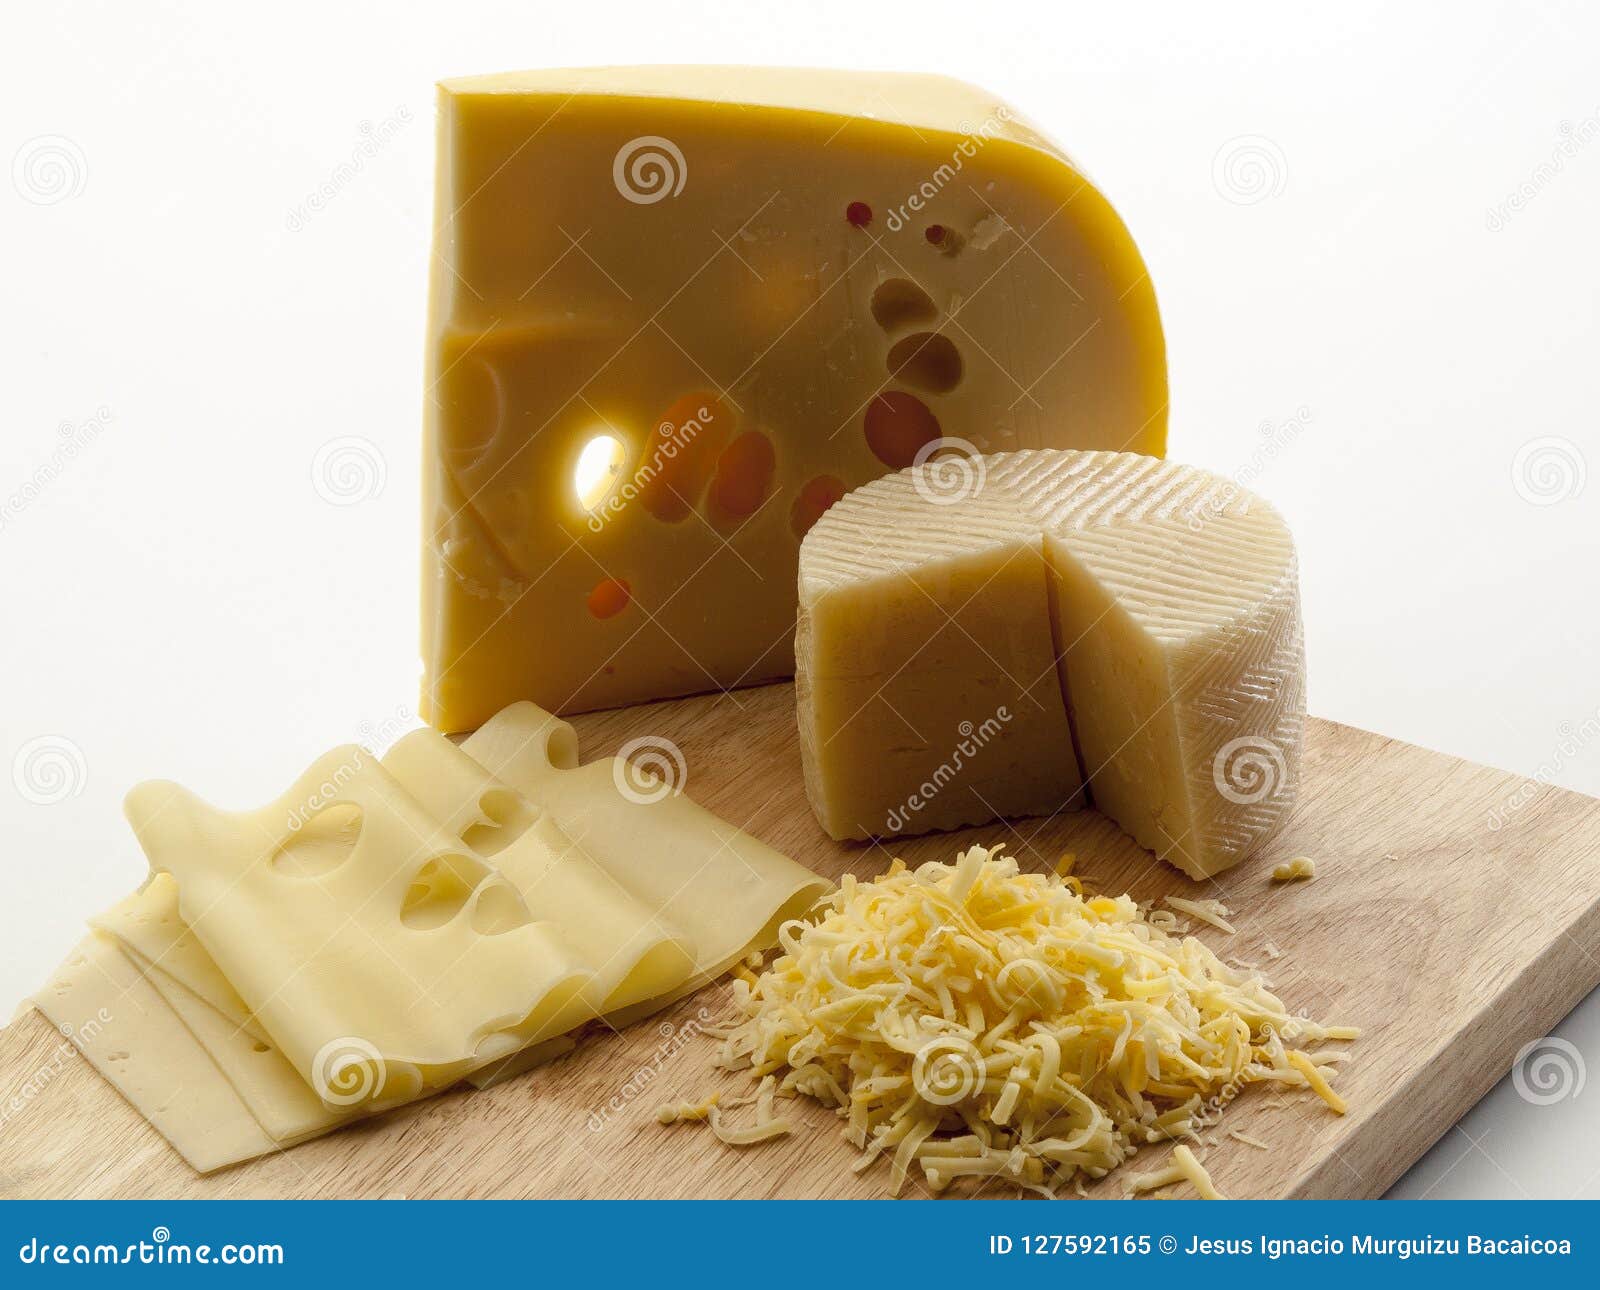 cutting board with two cheeses, grated and sliced Ã¢â¬â¹Ã¢â¬â¹on it